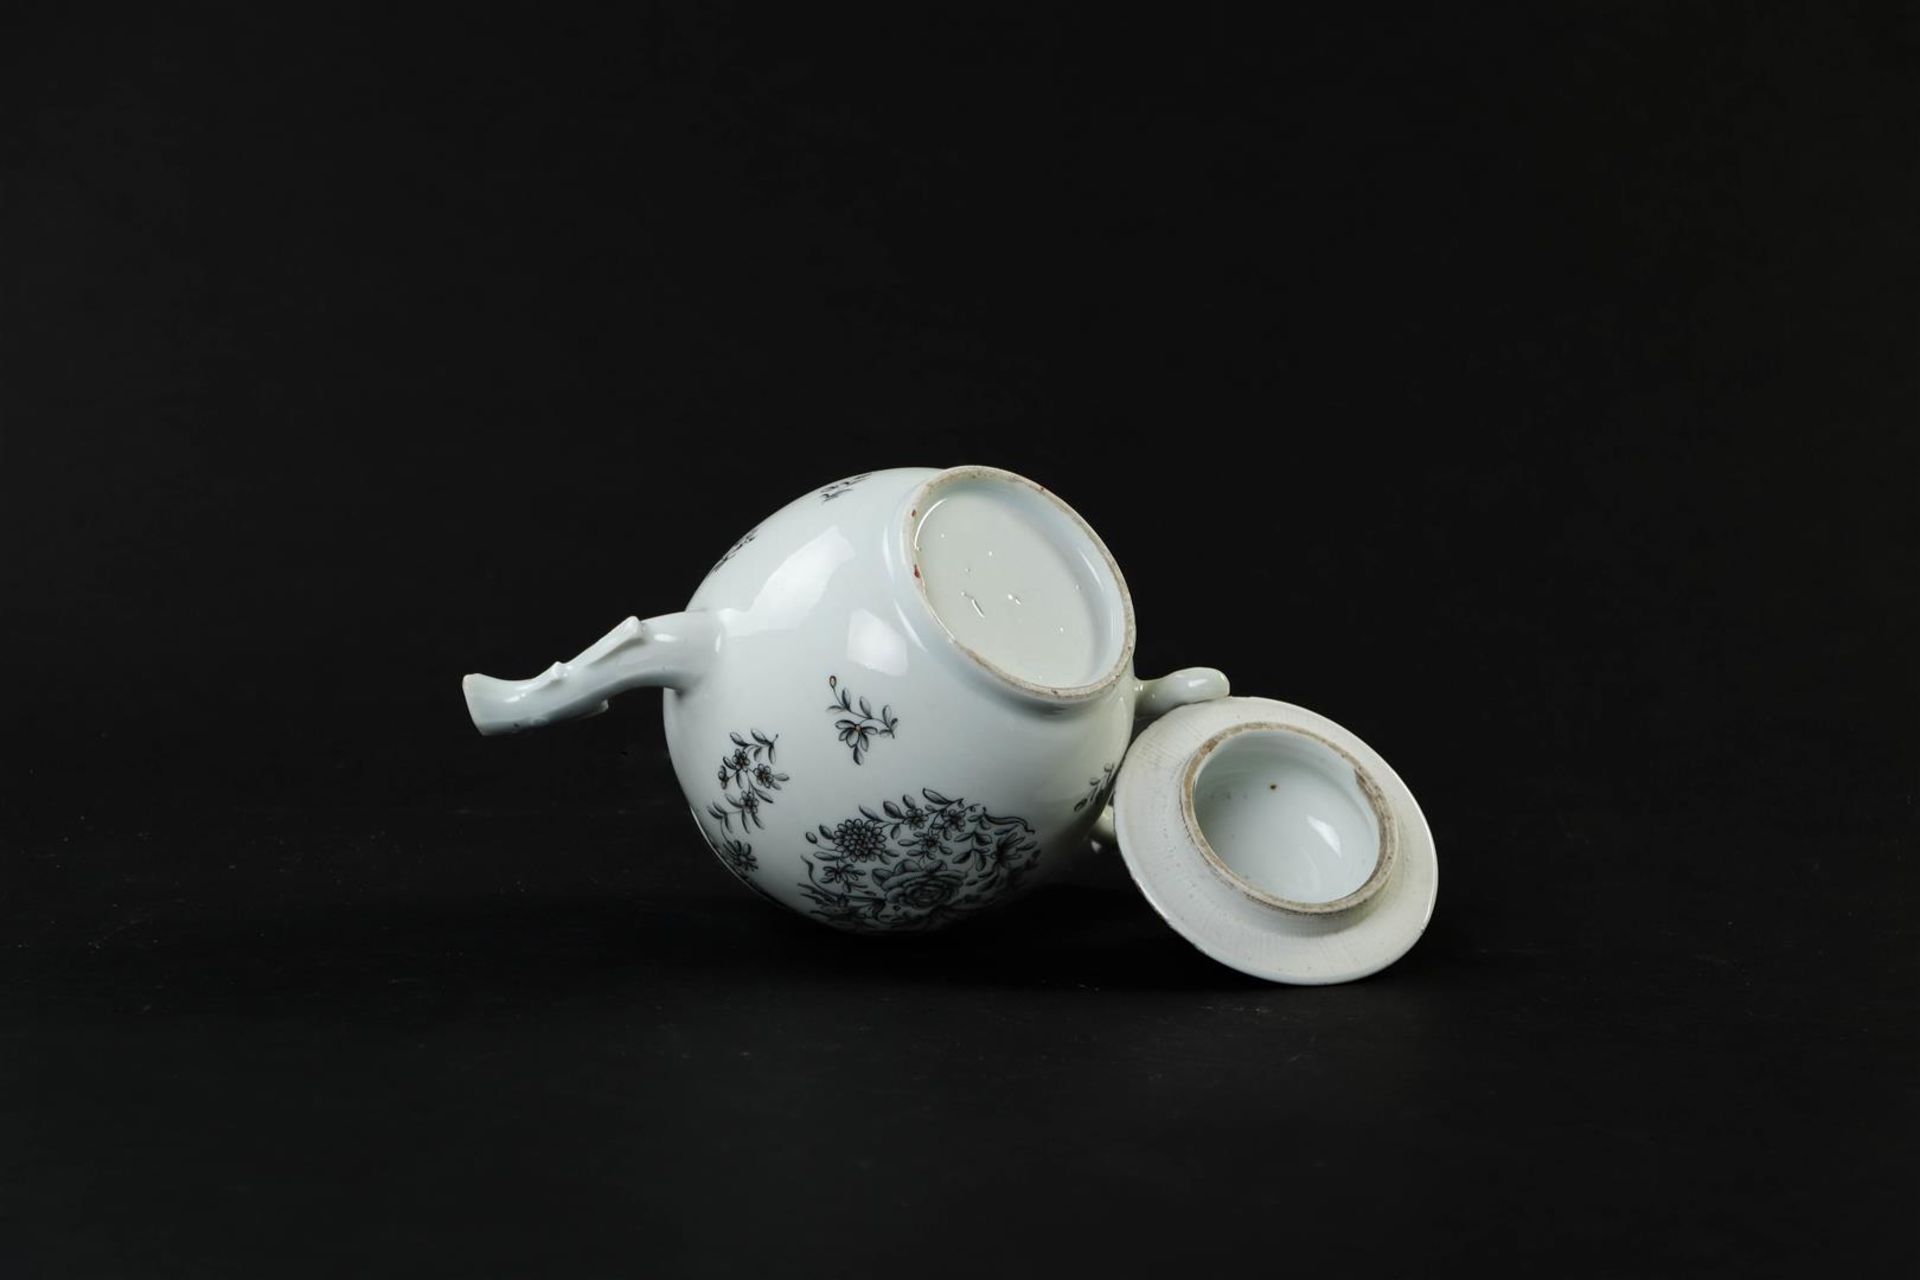 An Encre de Chine tableware set consisting of a teapot, milk jug, tea caddy, patty pan and spoon tra - Image 8 of 24